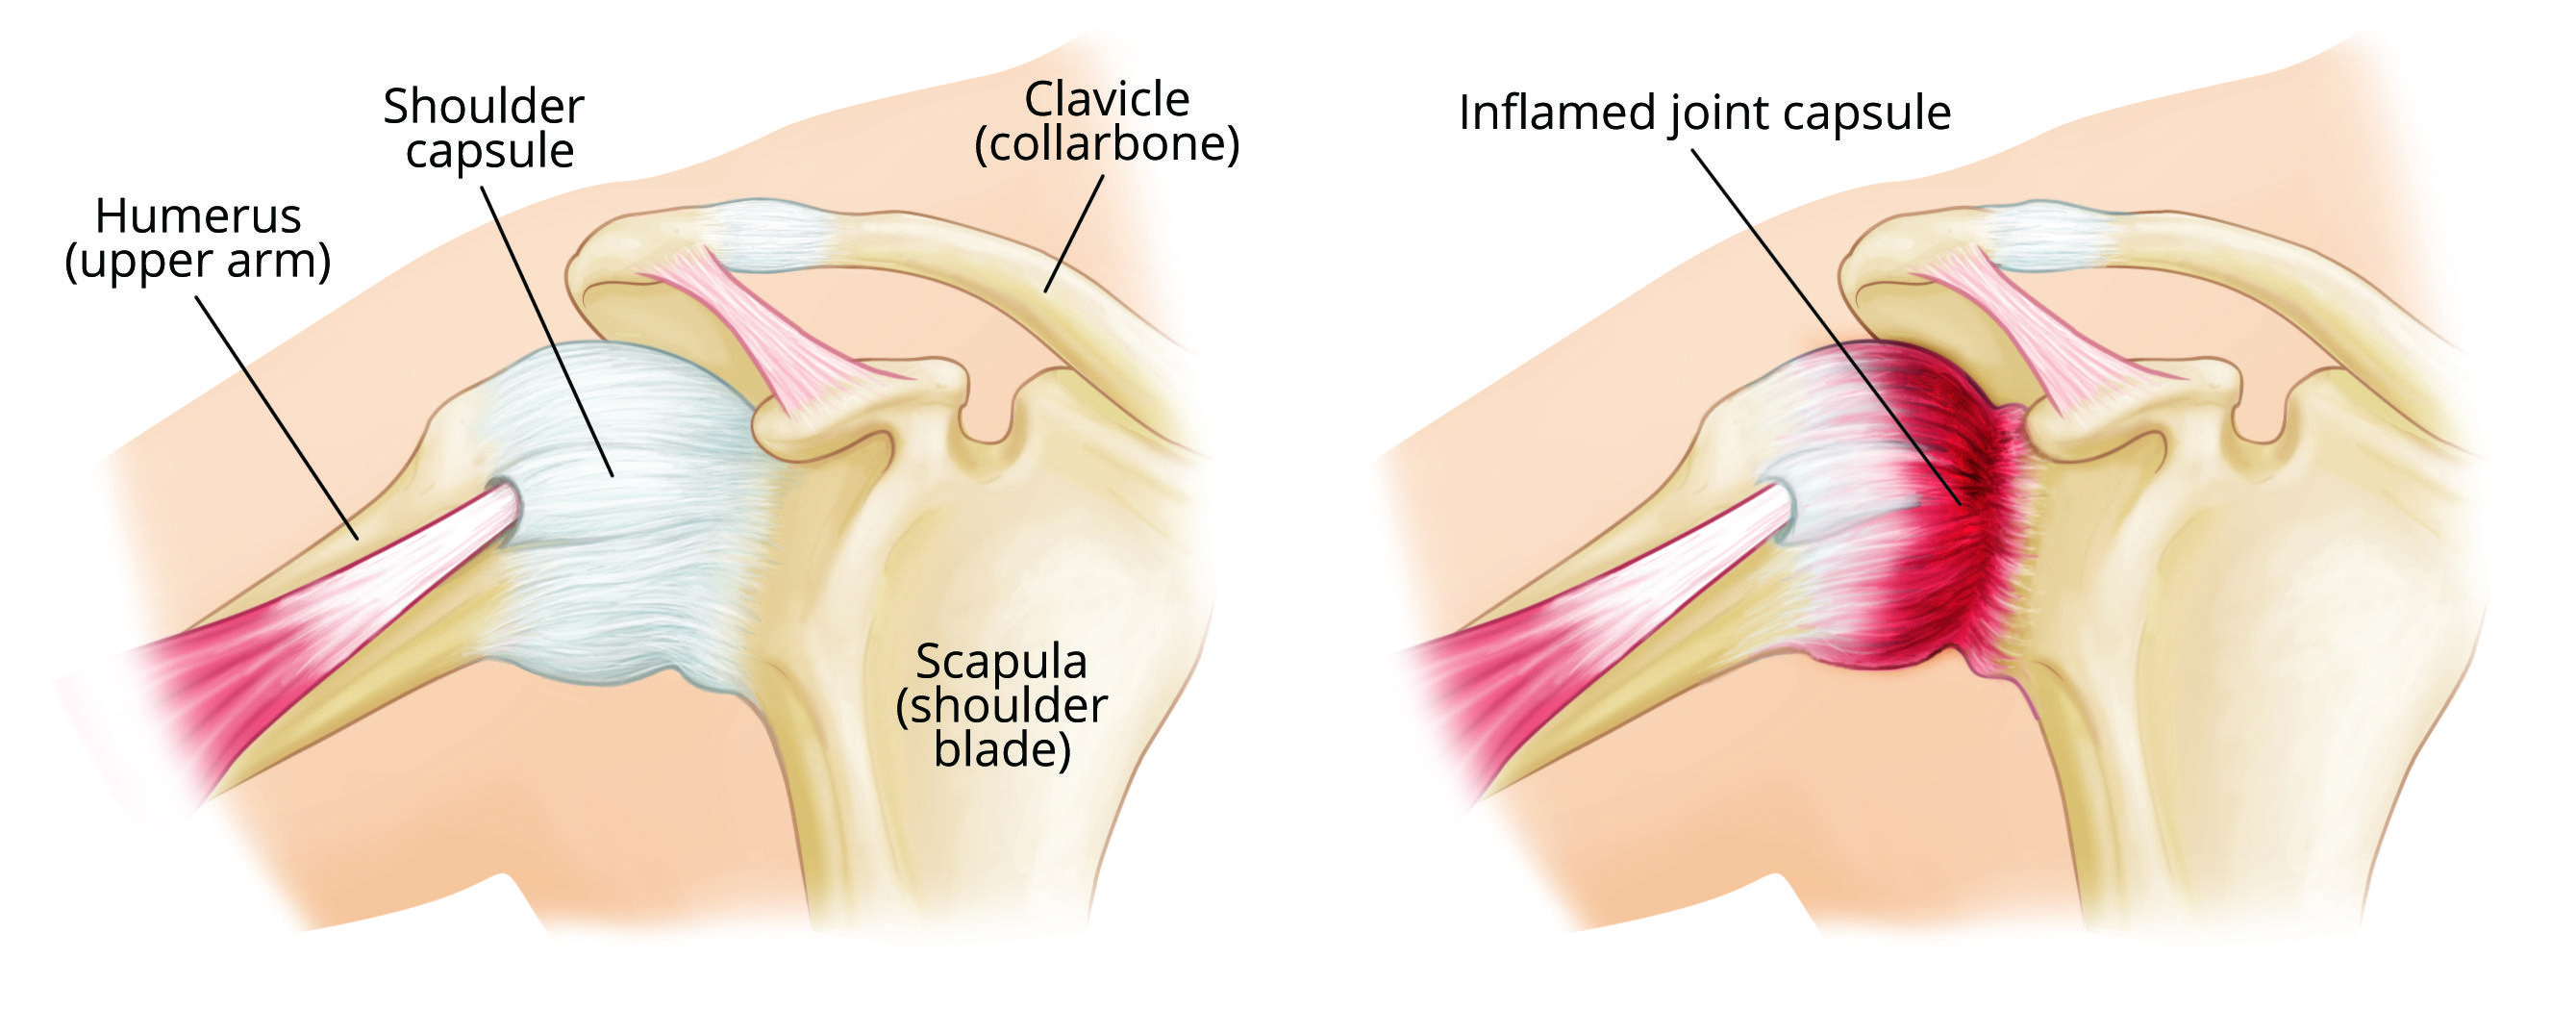 Inflamed joint capsule